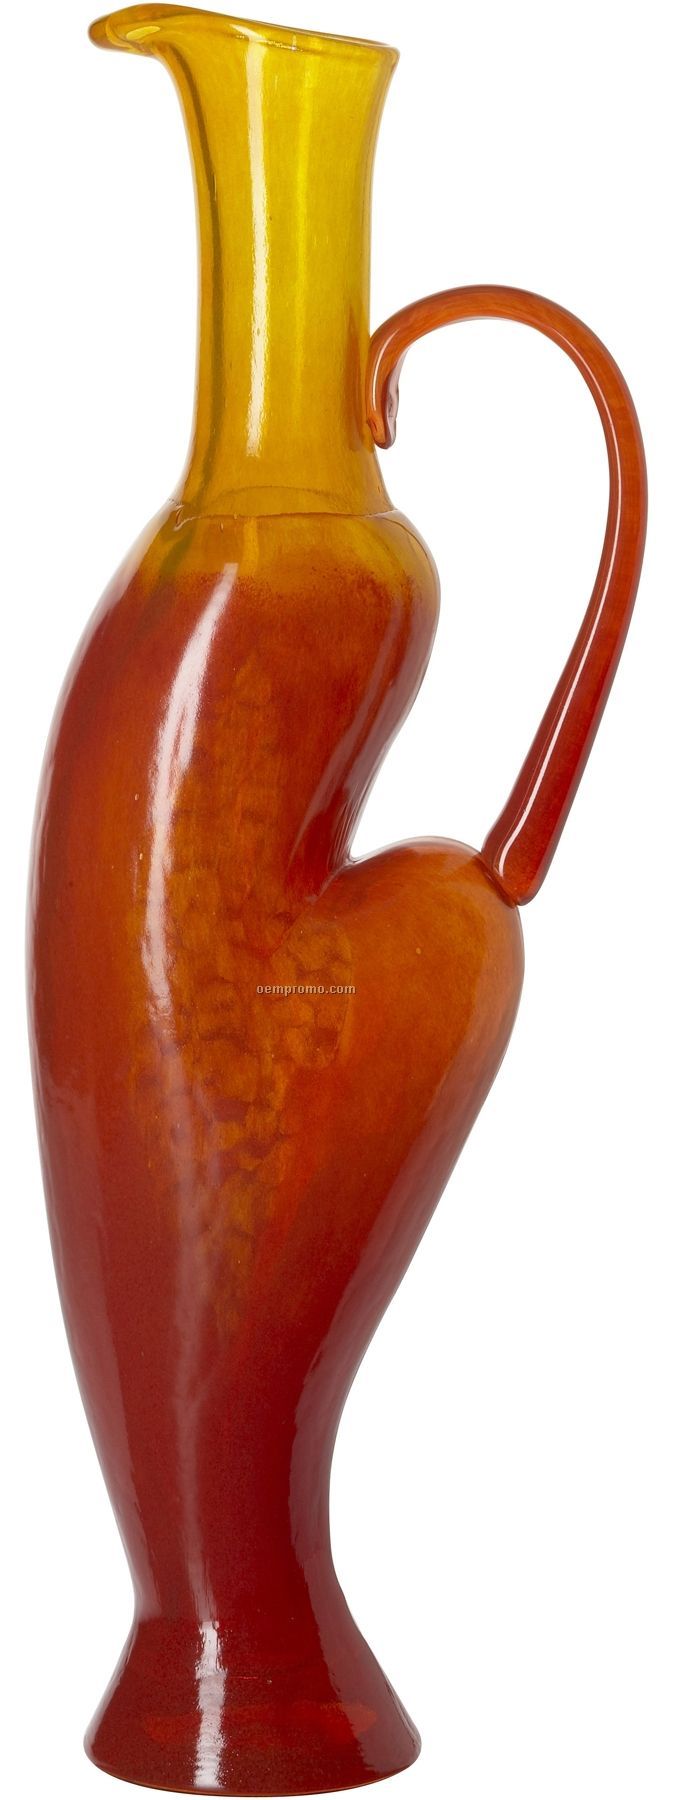 Corfu Curved Glass Pitcher By Kjell Engman